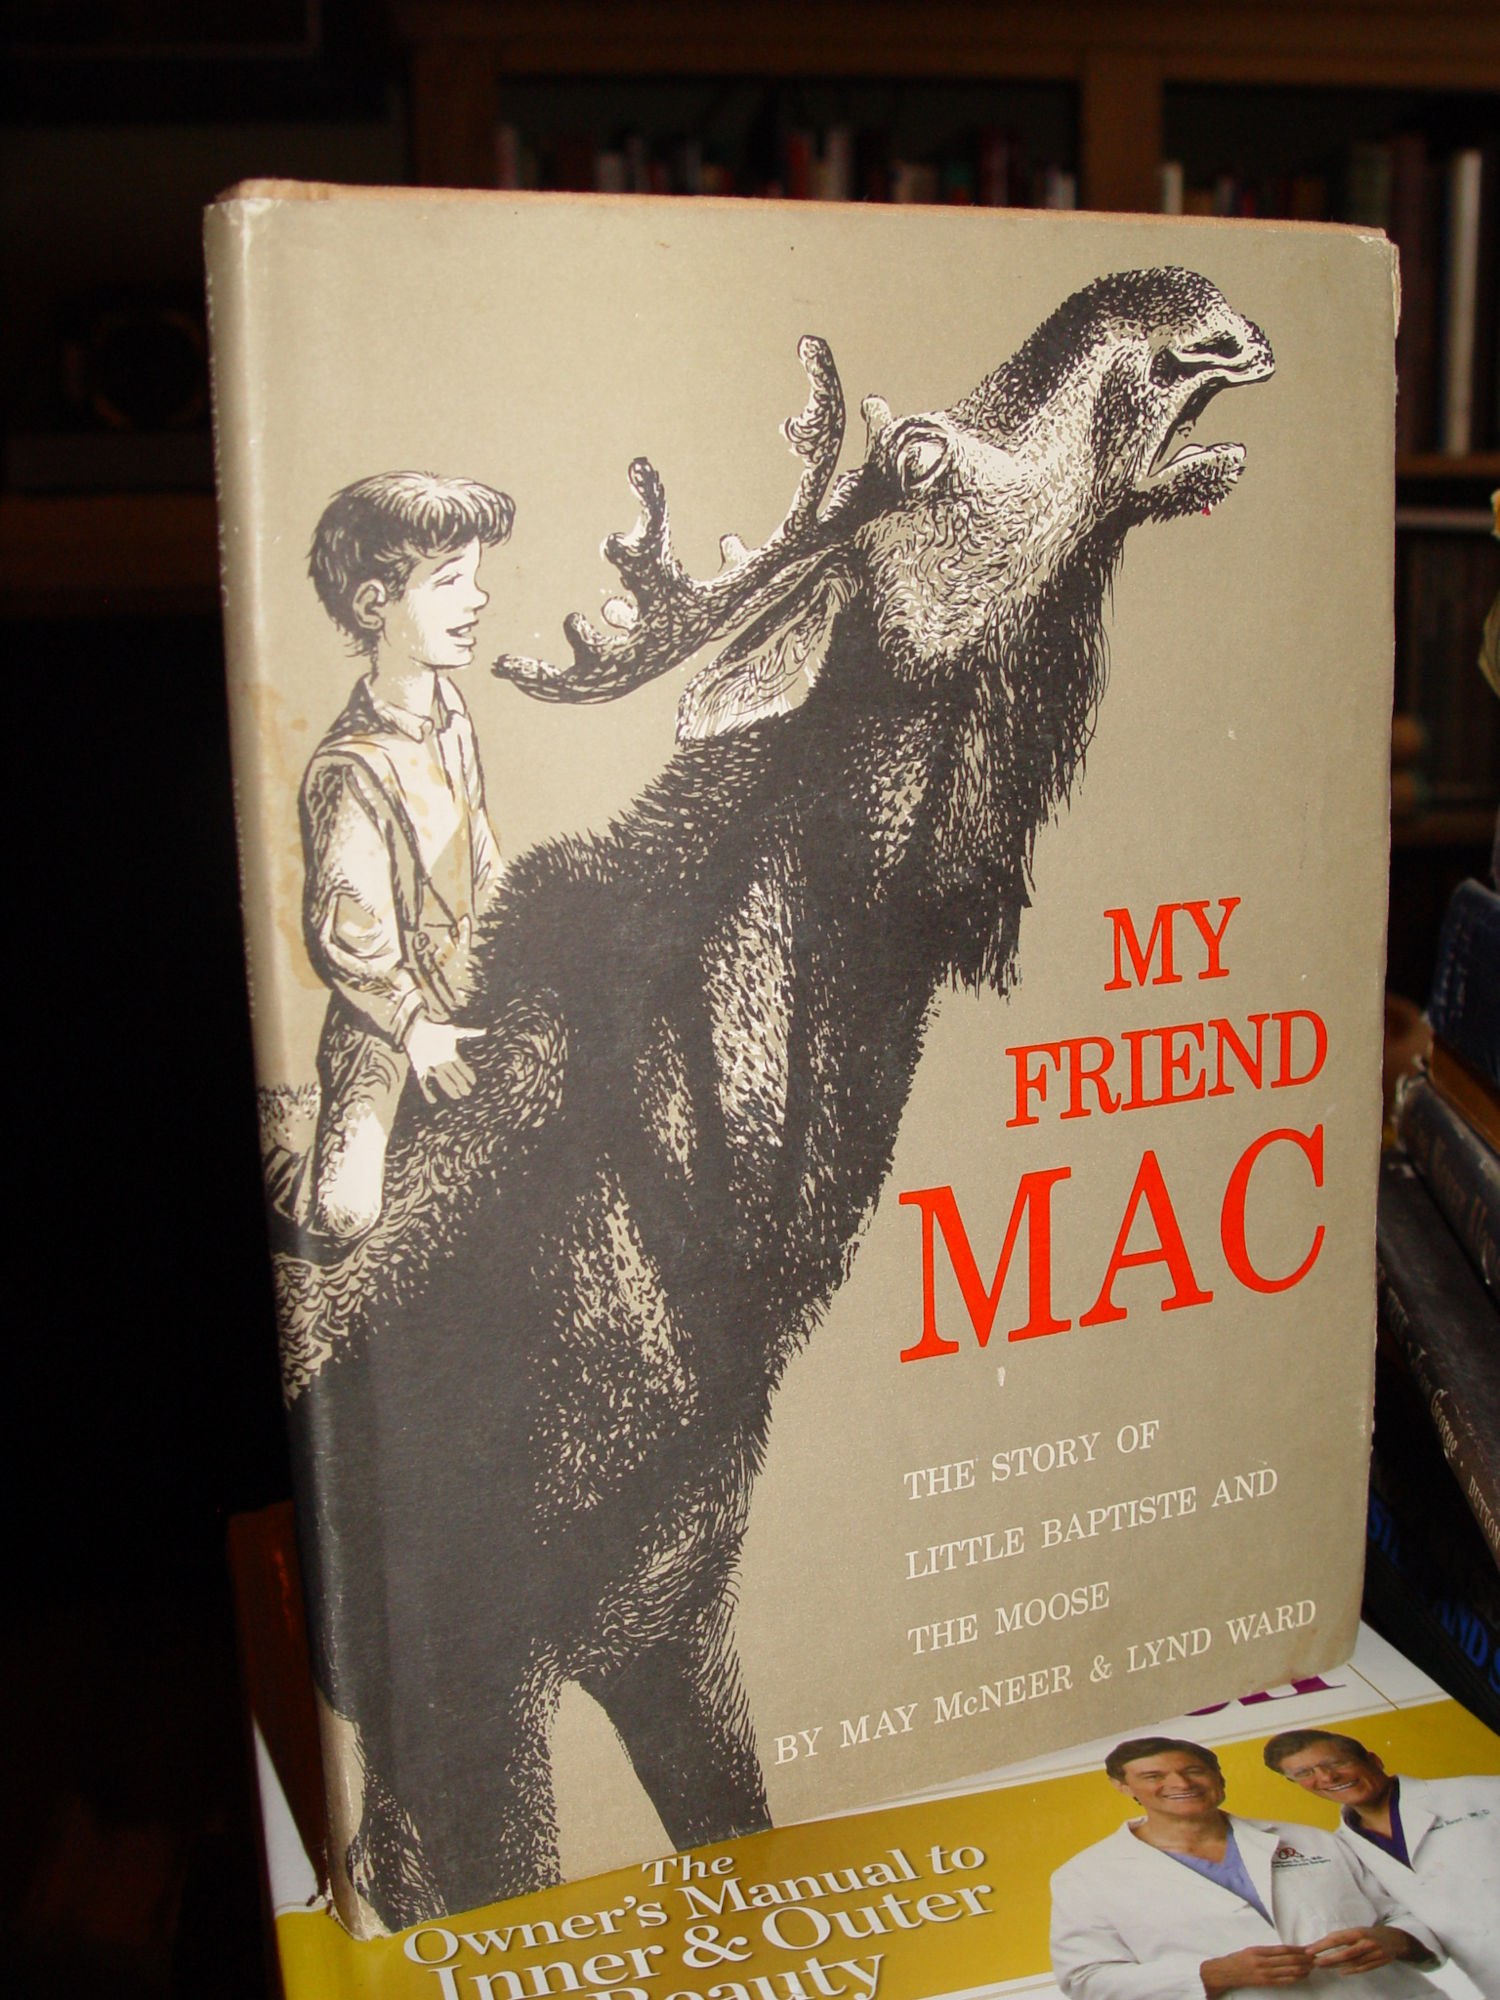 My
                Friend Max; The Story of Little Baptiste and The Moose
                1960 by May McNeer